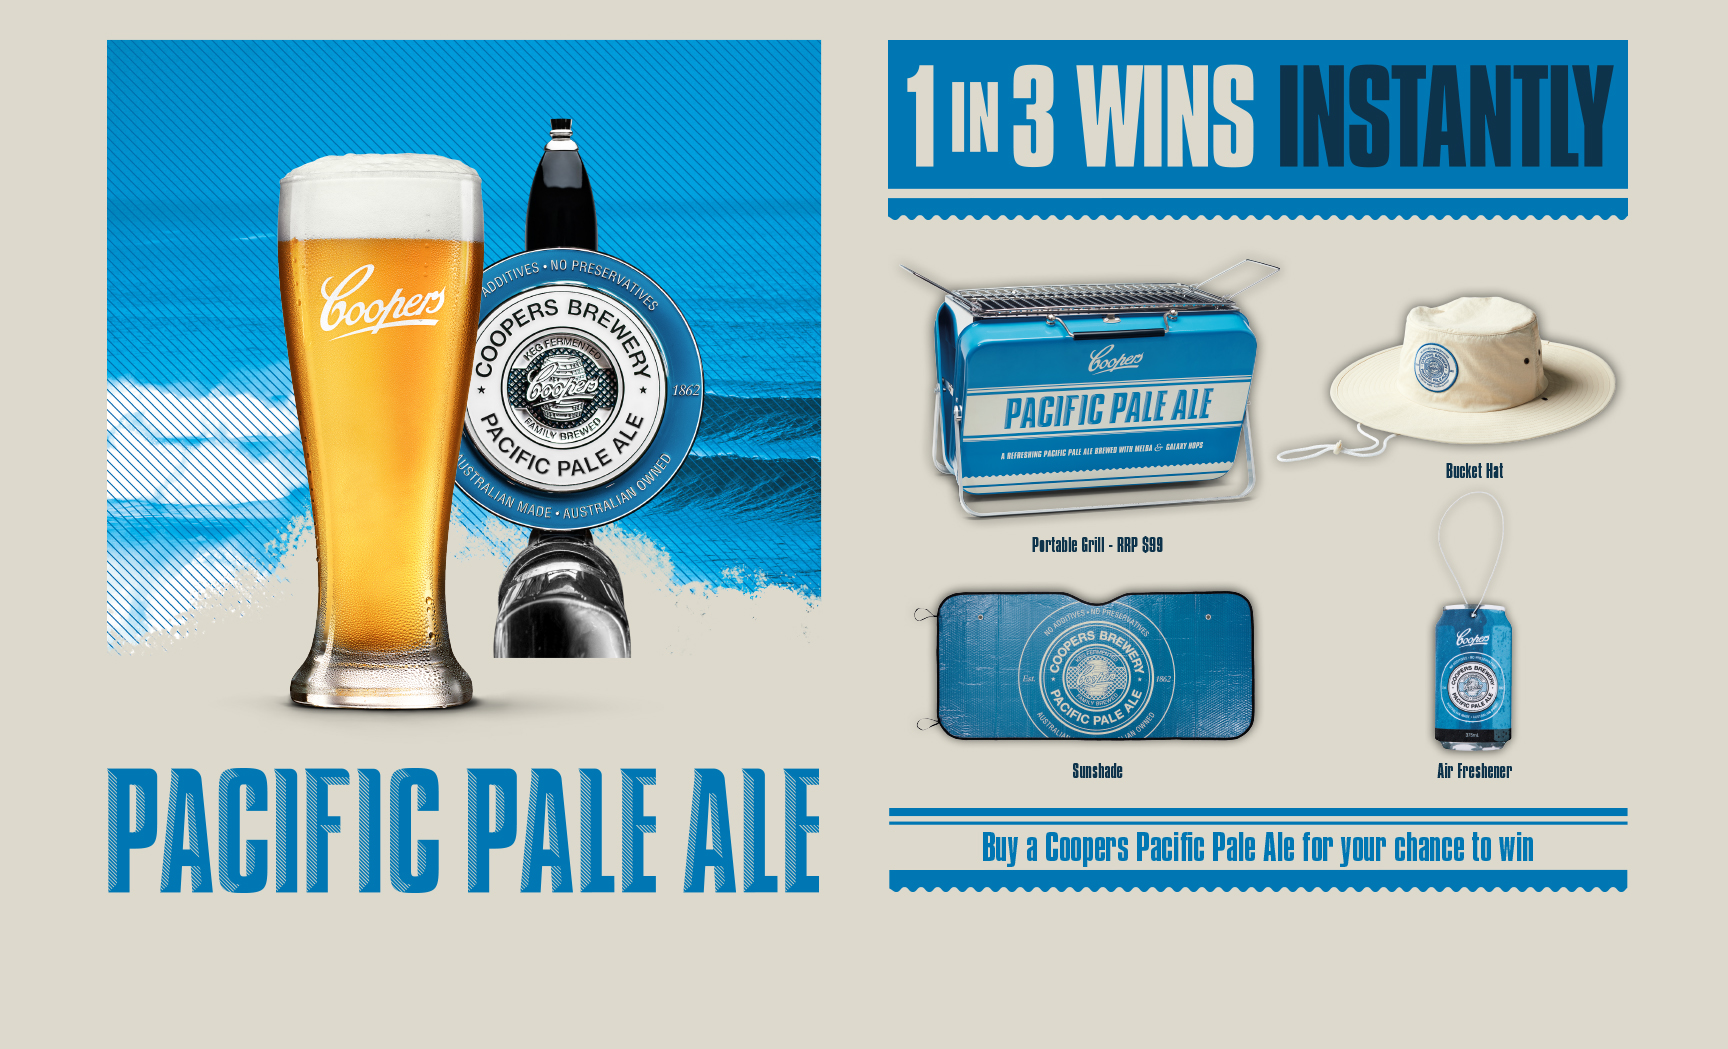 Coopers Pacific Pale Ale 1 in 3 wins Instantly Promotion